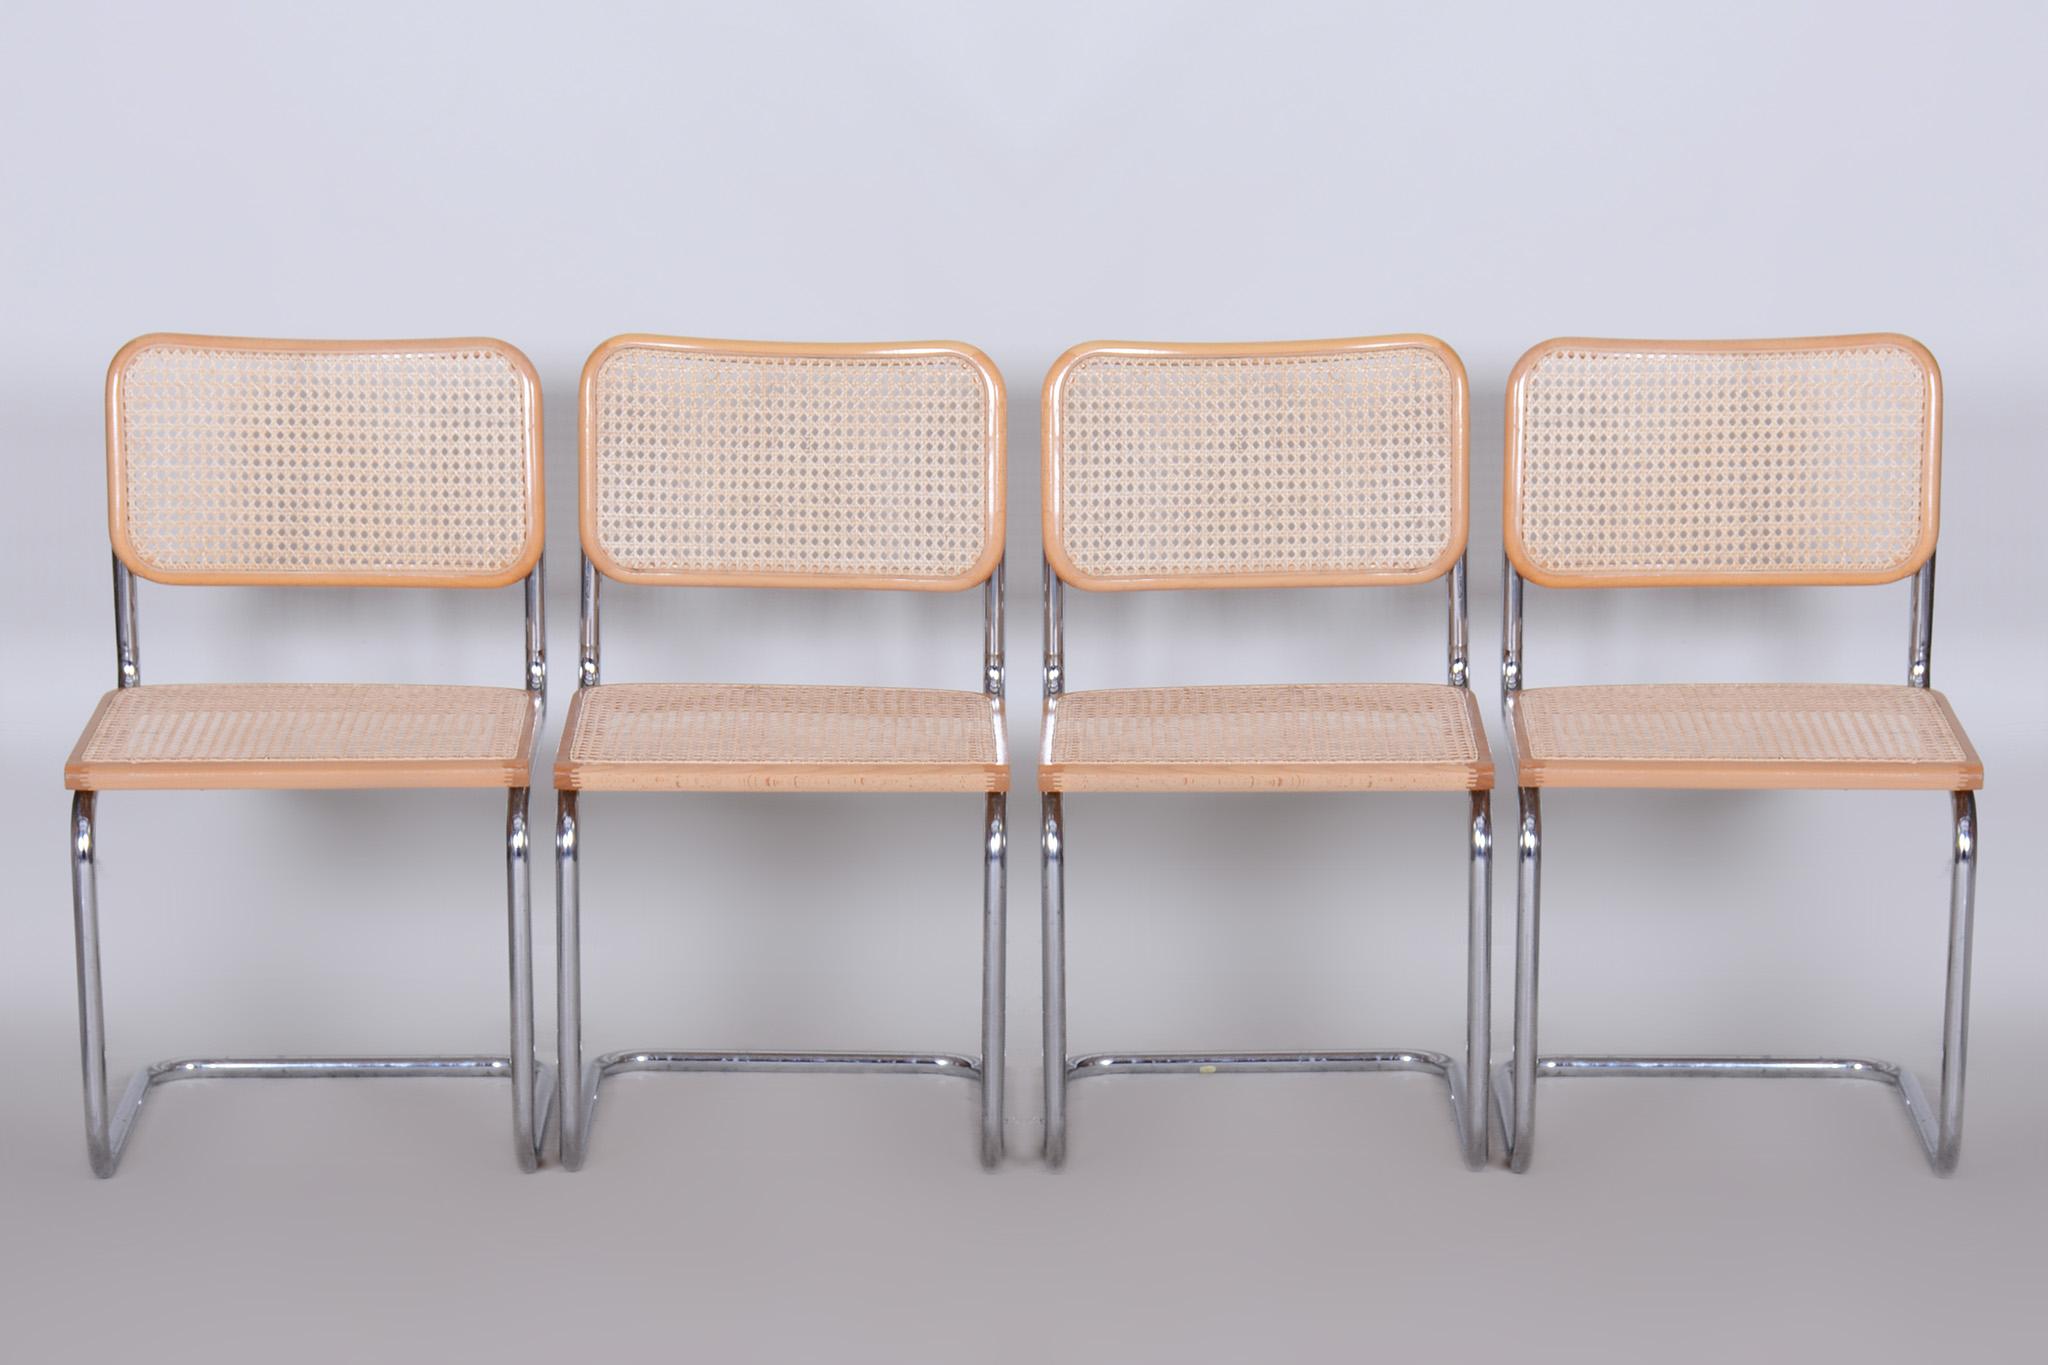 Original set of four Bauhaus chairs. Original well-preserved condition.

Period: 1960-1969
Source: Italy
Material: Chrome-plated steel, rattan, beech

Professionally cleaned.